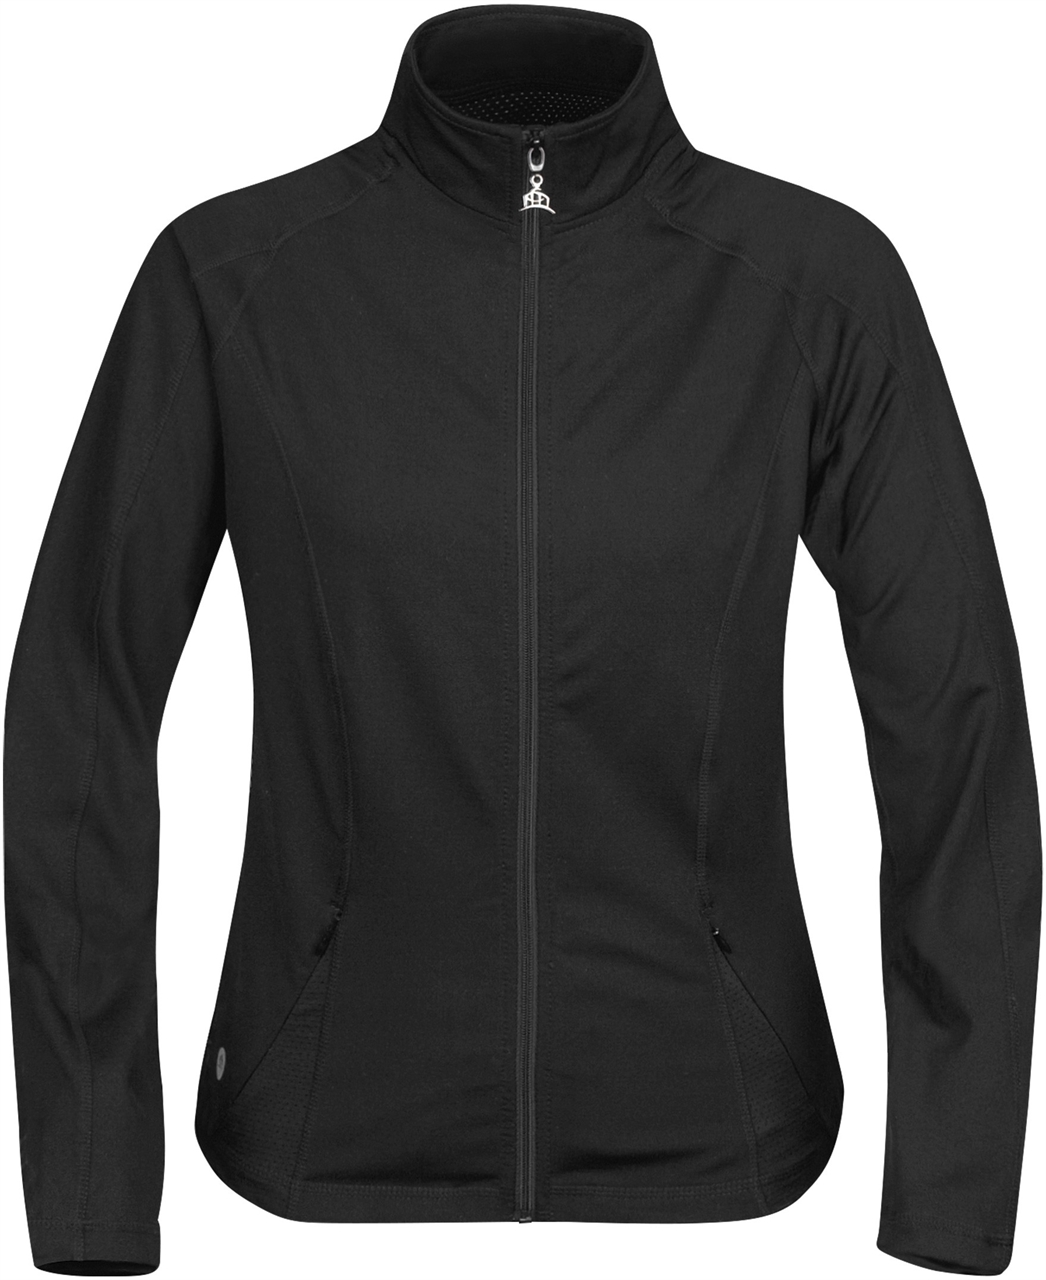 Picture of Stormtech Youth Flex Textured Jacket